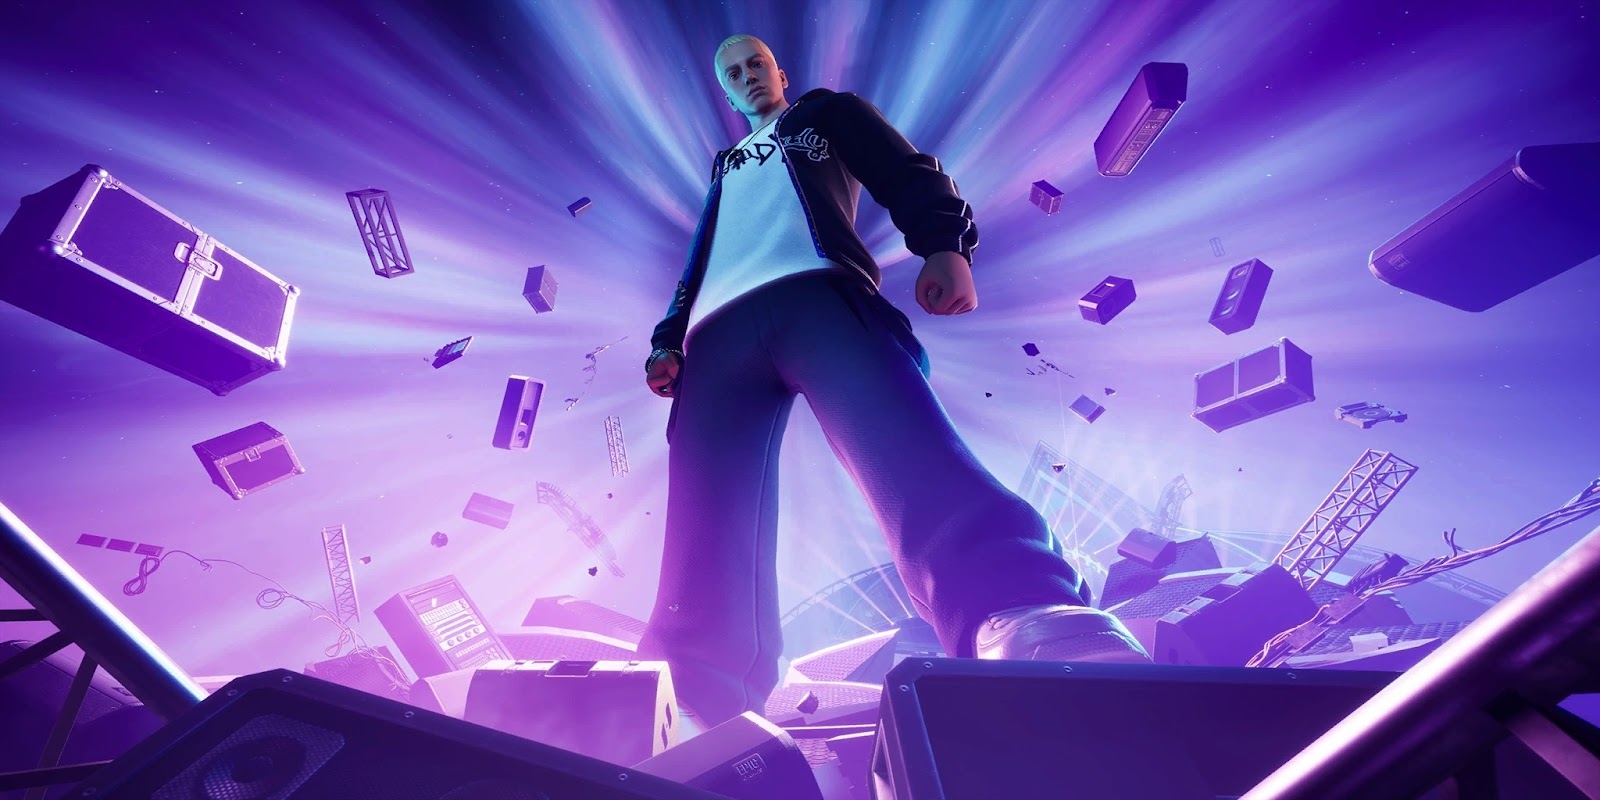 The 'Storm Flip' item is coming to Fortnite